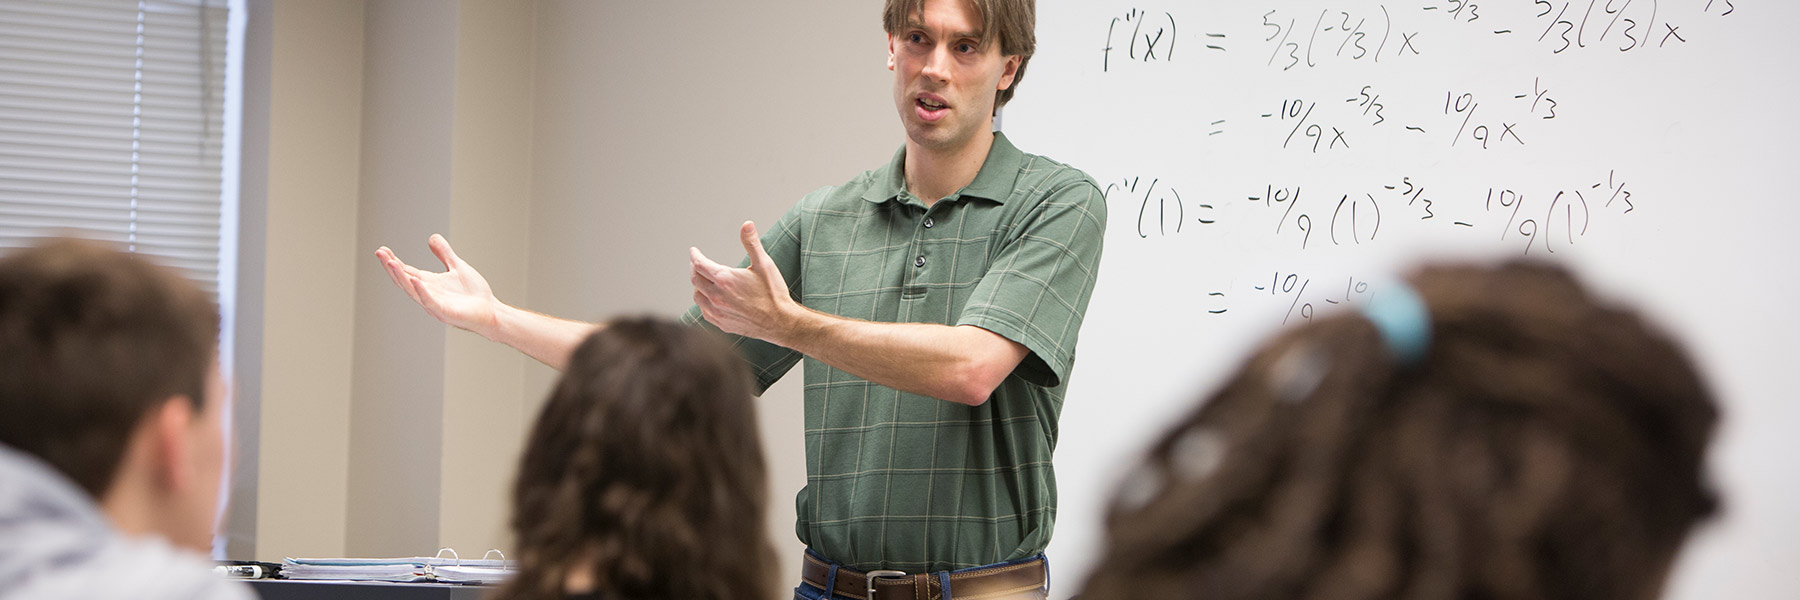 An instructor lectures in front of a whiteboard filled with equations.